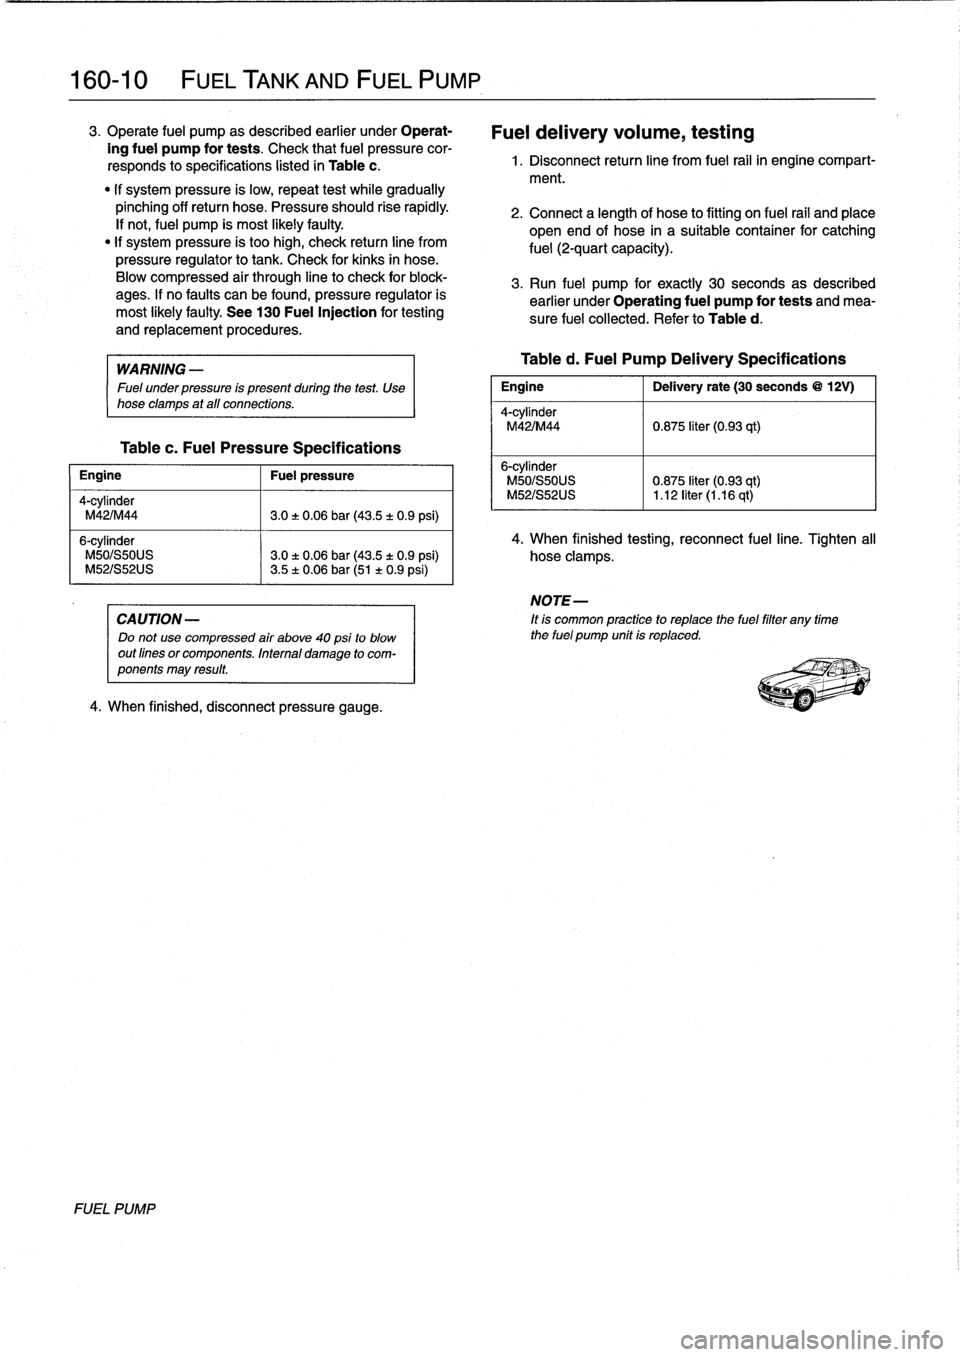 BMW 323i 1995 E36 Workshop Manual 
160-
1
0

	

FUEL
TANK
AND
FUEL
PUMP

3
.
Operate
fuel
pump
as
described
earlier
under
Operat-

ing
fuel
pump
for
tests
.
Check
that
fuel
pressure
cor-

responds
to
specifications
listed
in
Table
c
.